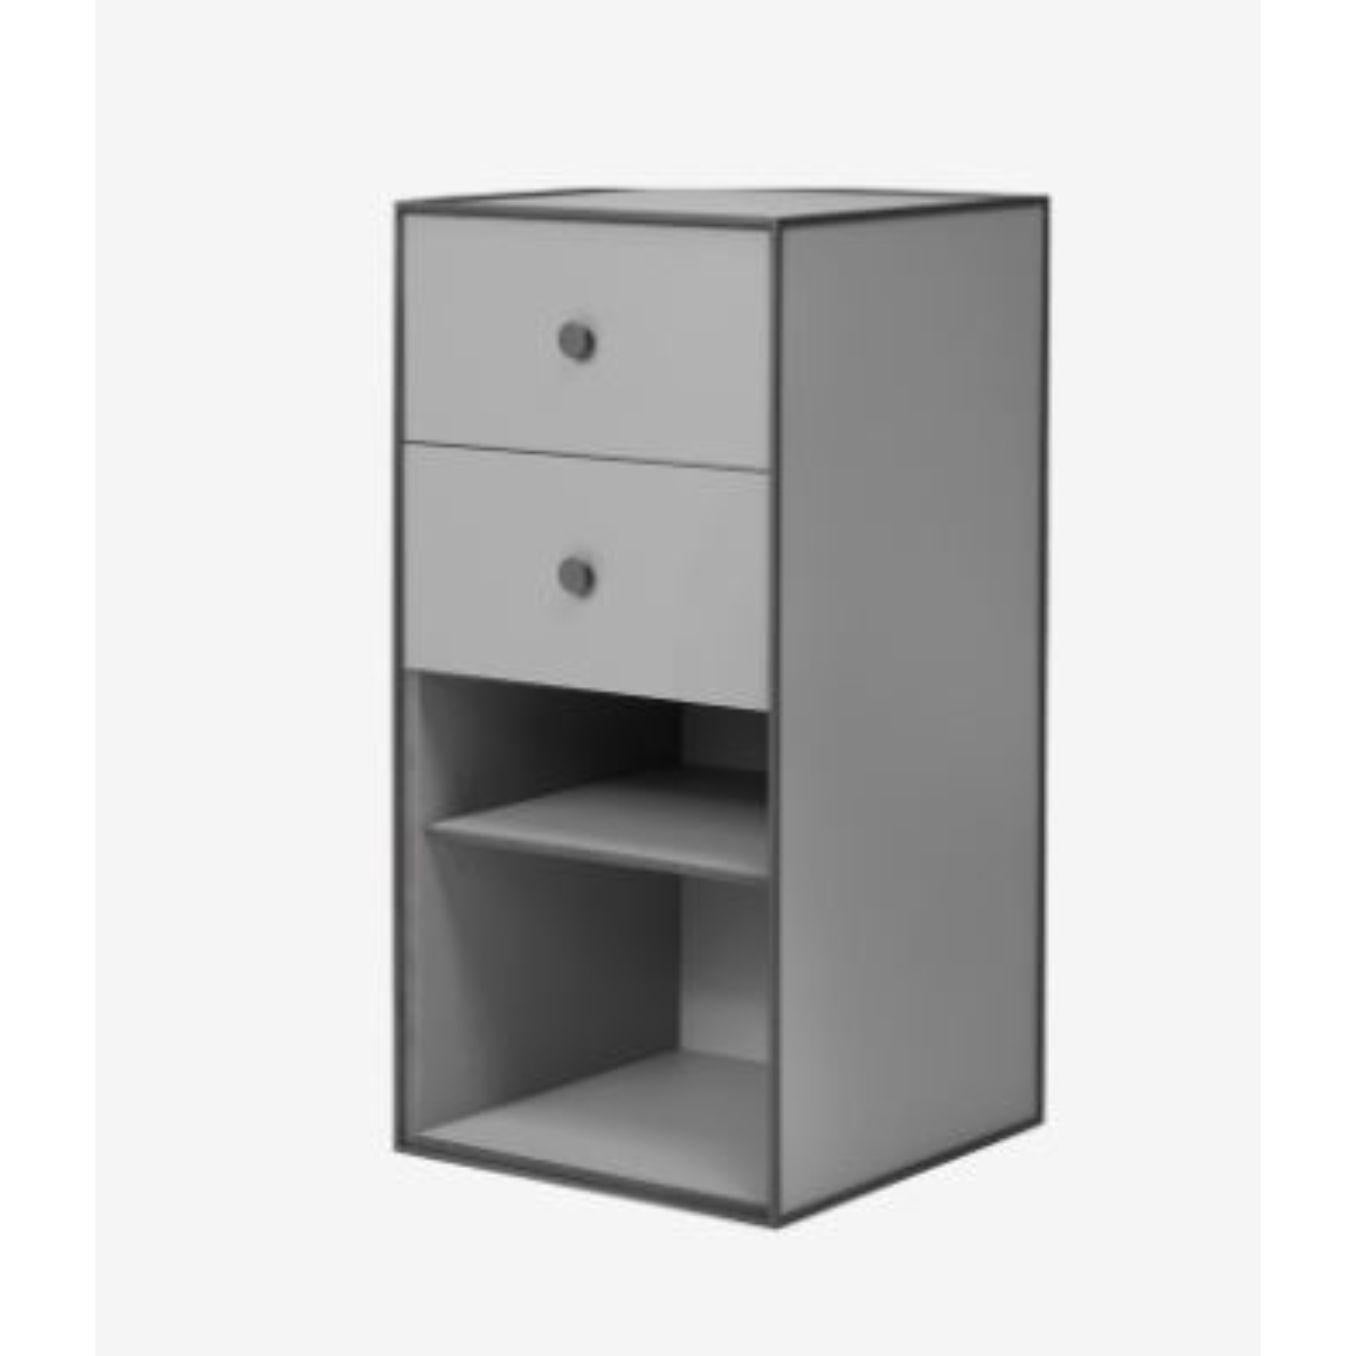 70 dark grey frame box with shelf / 2 drawers by Lassen
Dimensions: D 35 x W 35 x H 70 cm 
Materials: Finér, Melamin, Melamin, Melamine, Metal, Veneer
Also available in different colors and dimensions. 
Weight: 13 Kg


By Lassen is a Danish